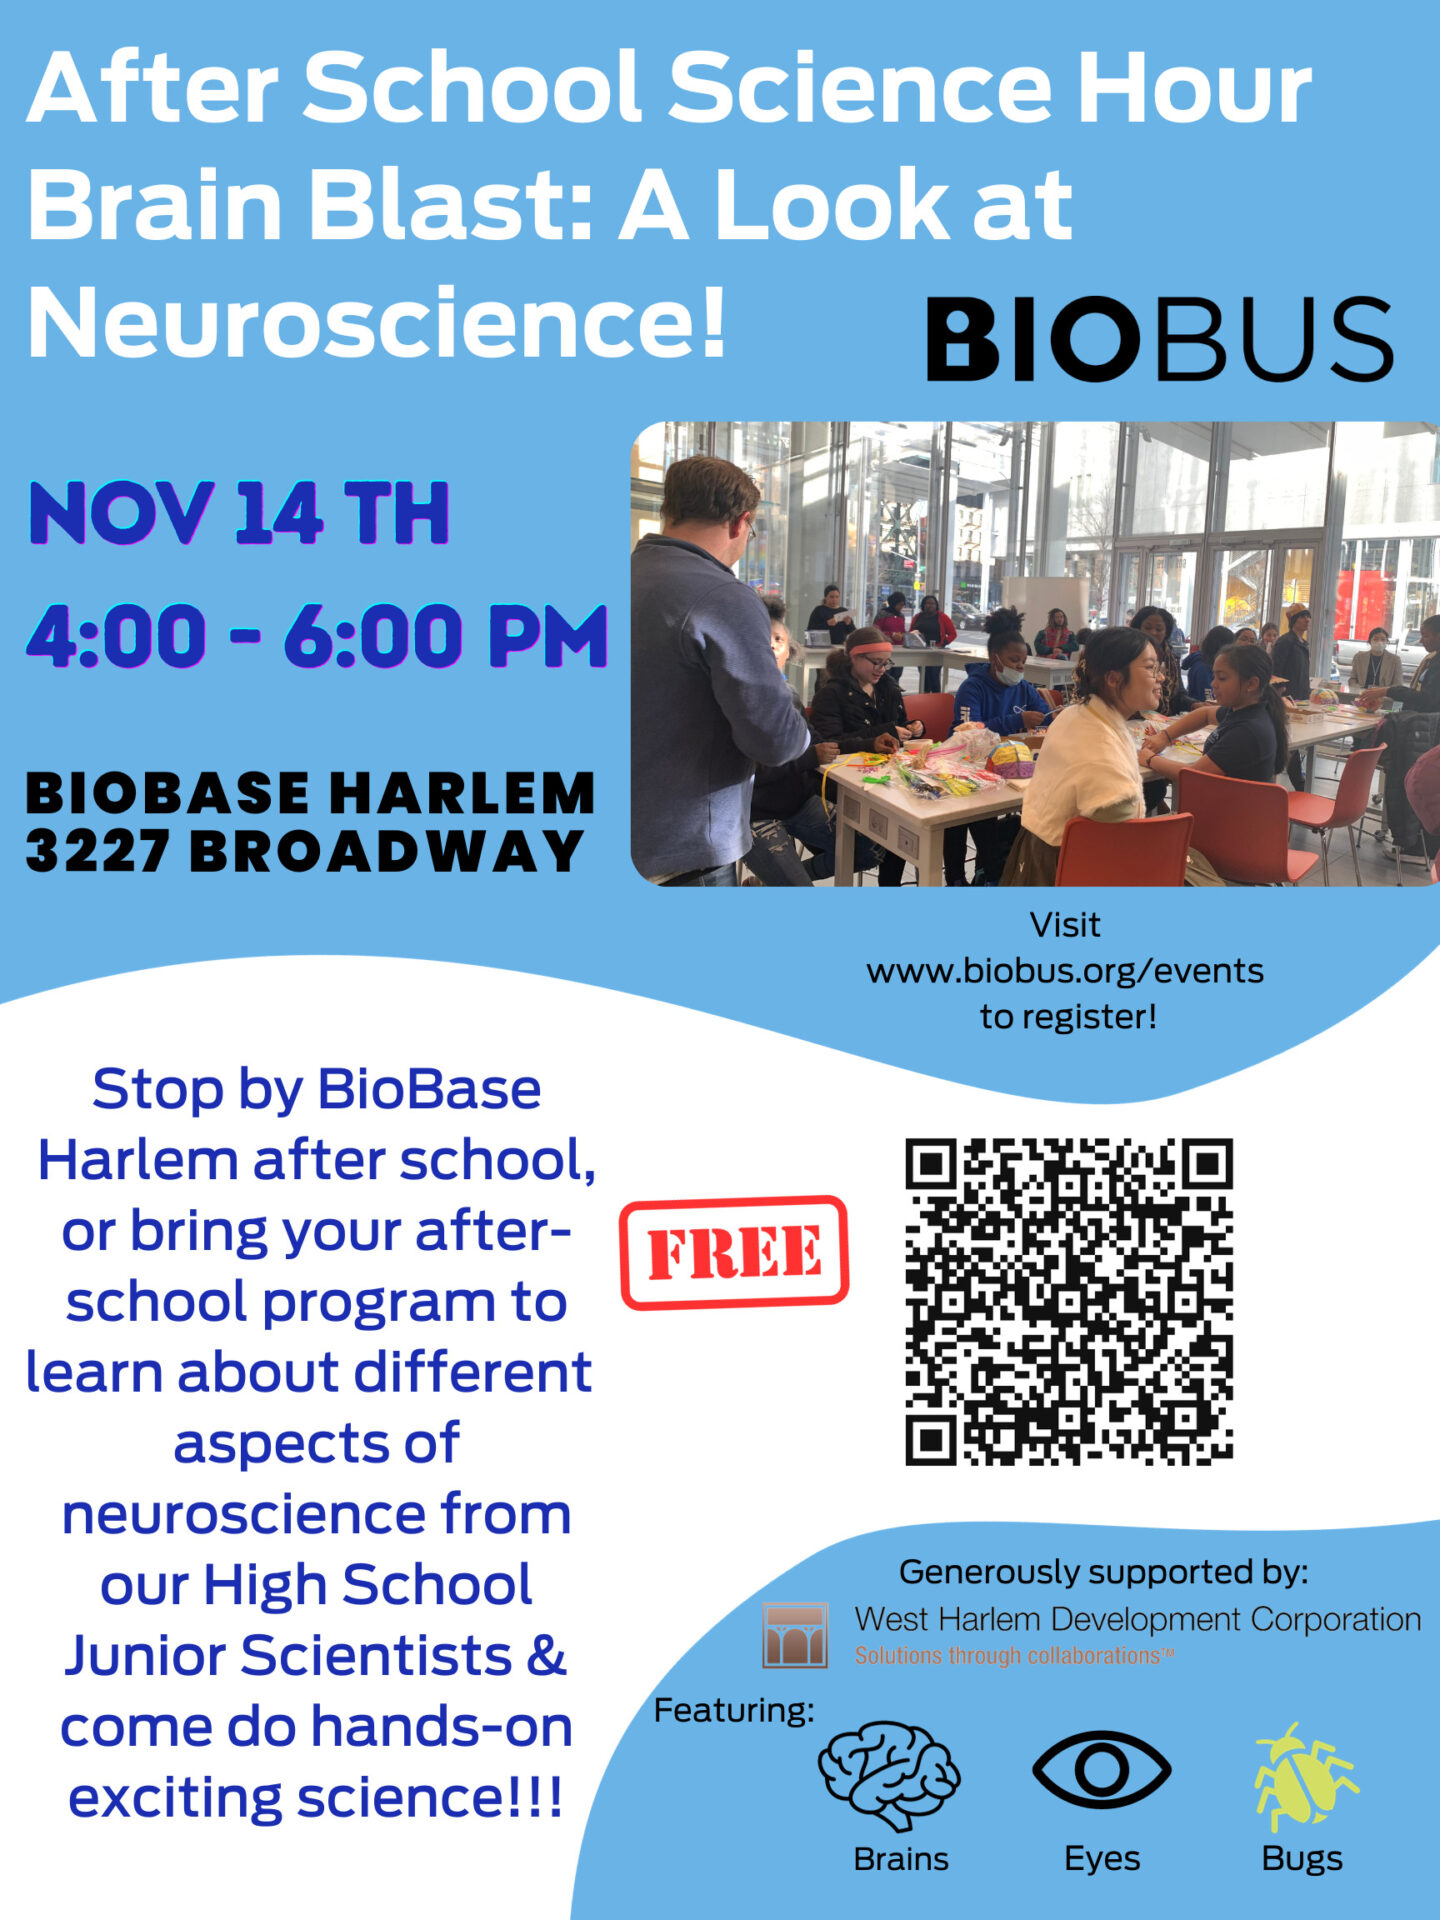 After School Science Hour at BioBase Harlem